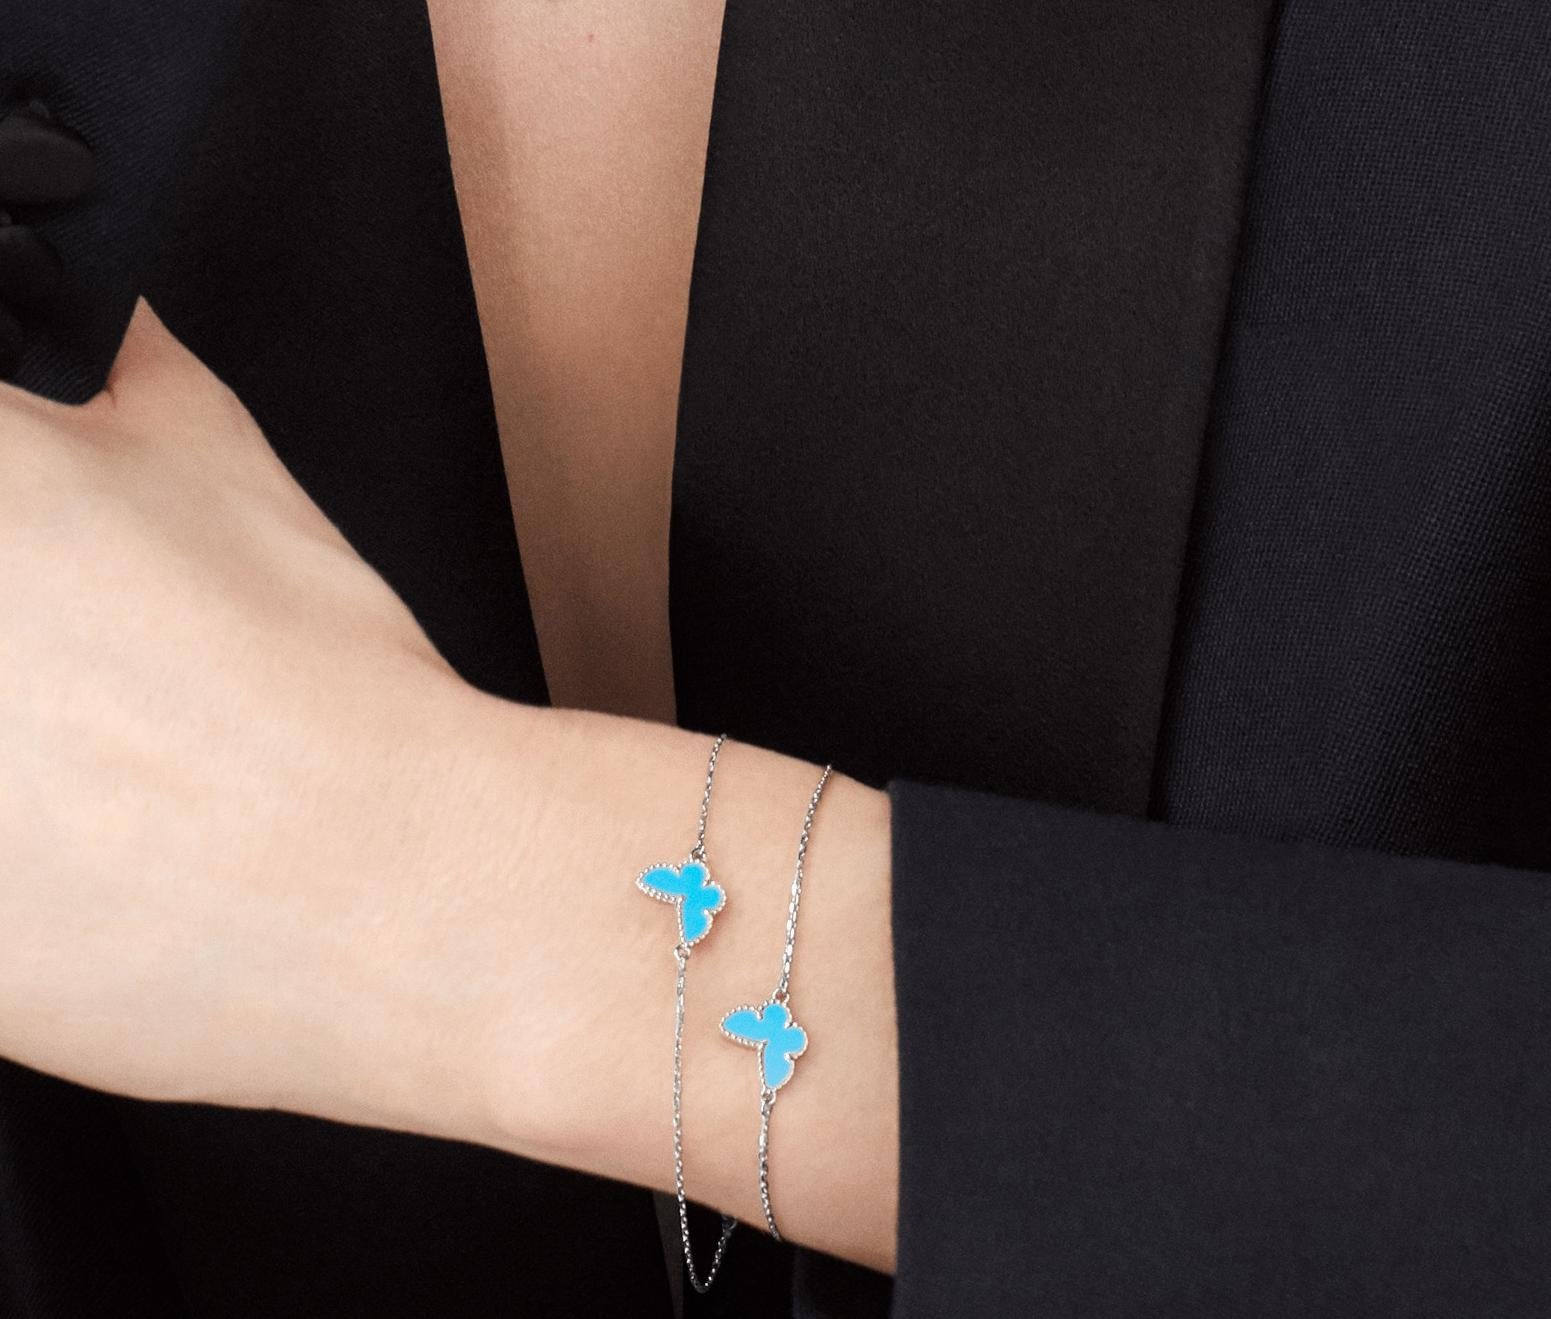 Brand: Van Cleef & Arpels
Collection: Seet Alhambra
It comes with the Original Box and Papers
Gemstone: Natural Turquoise
Metal: 18K White Gold
Bracelet Length: 6.75 Inches
It can be resized complimentary